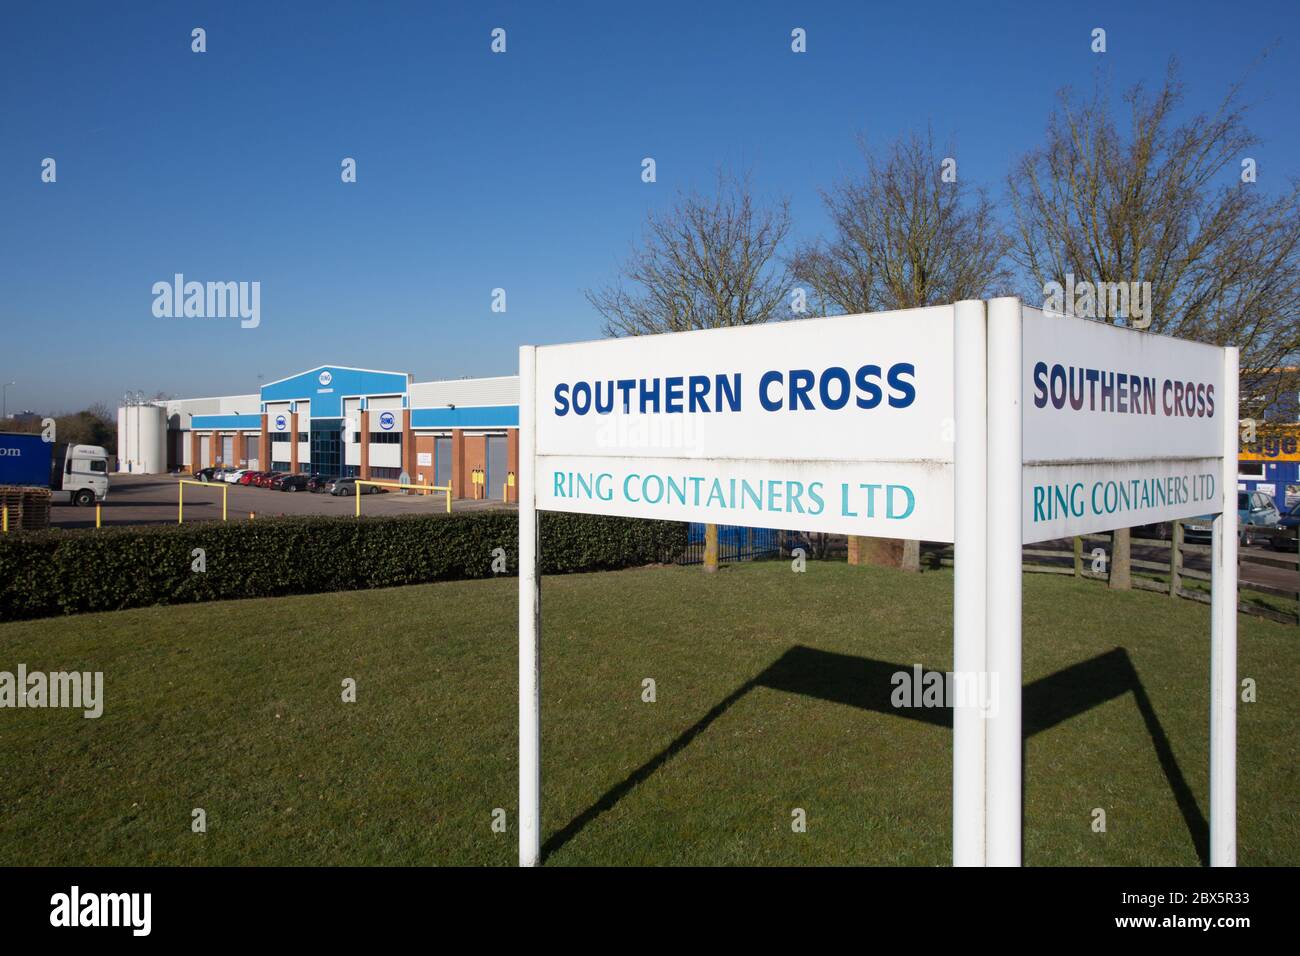 Ring Containers Räumlichkeiten, Southern Cross, Swanley, Kent Stockfoto